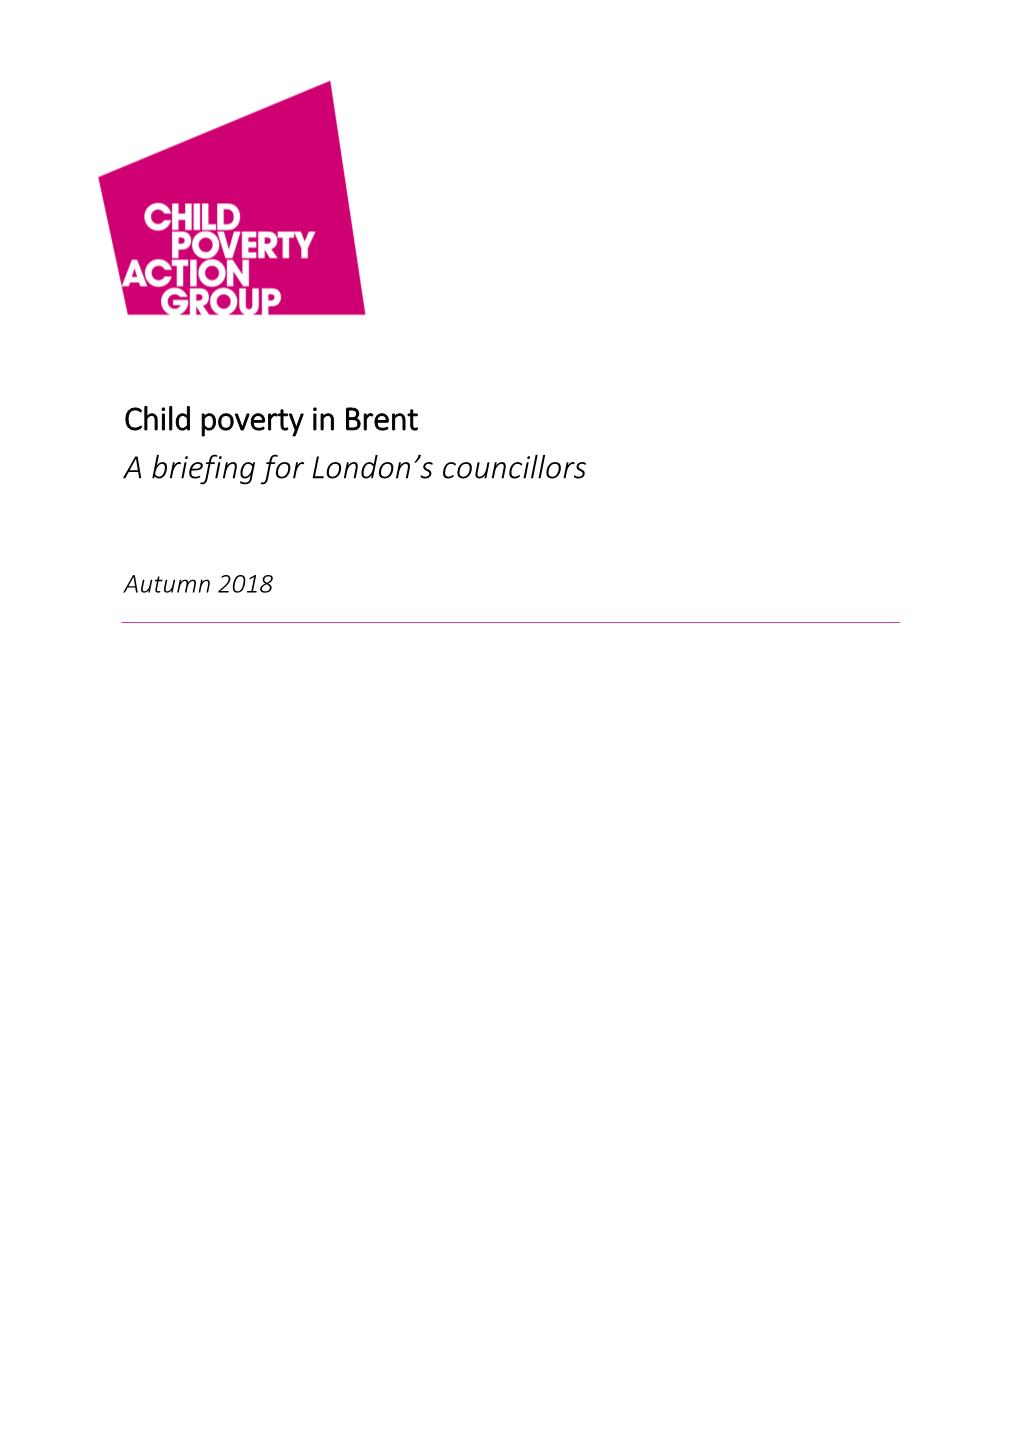 Child Poverty in Brent a Briefing for London's Councillors